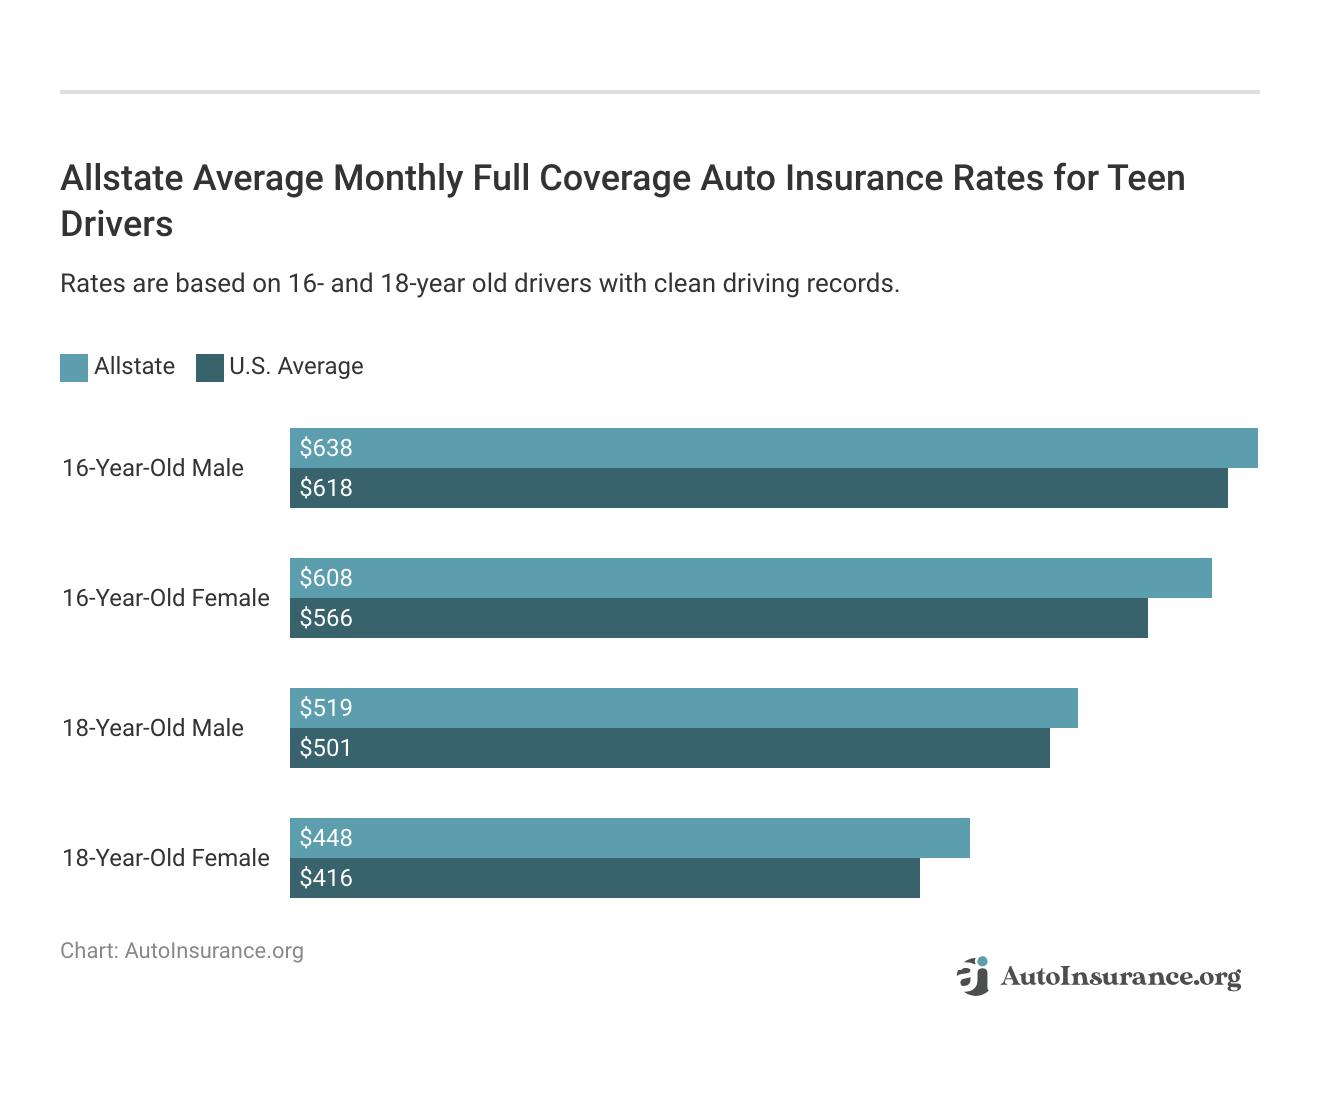 <h3>Allstate Average Monthly Full Coverage Auto Insurance Rates for Teen Drivers</h3>